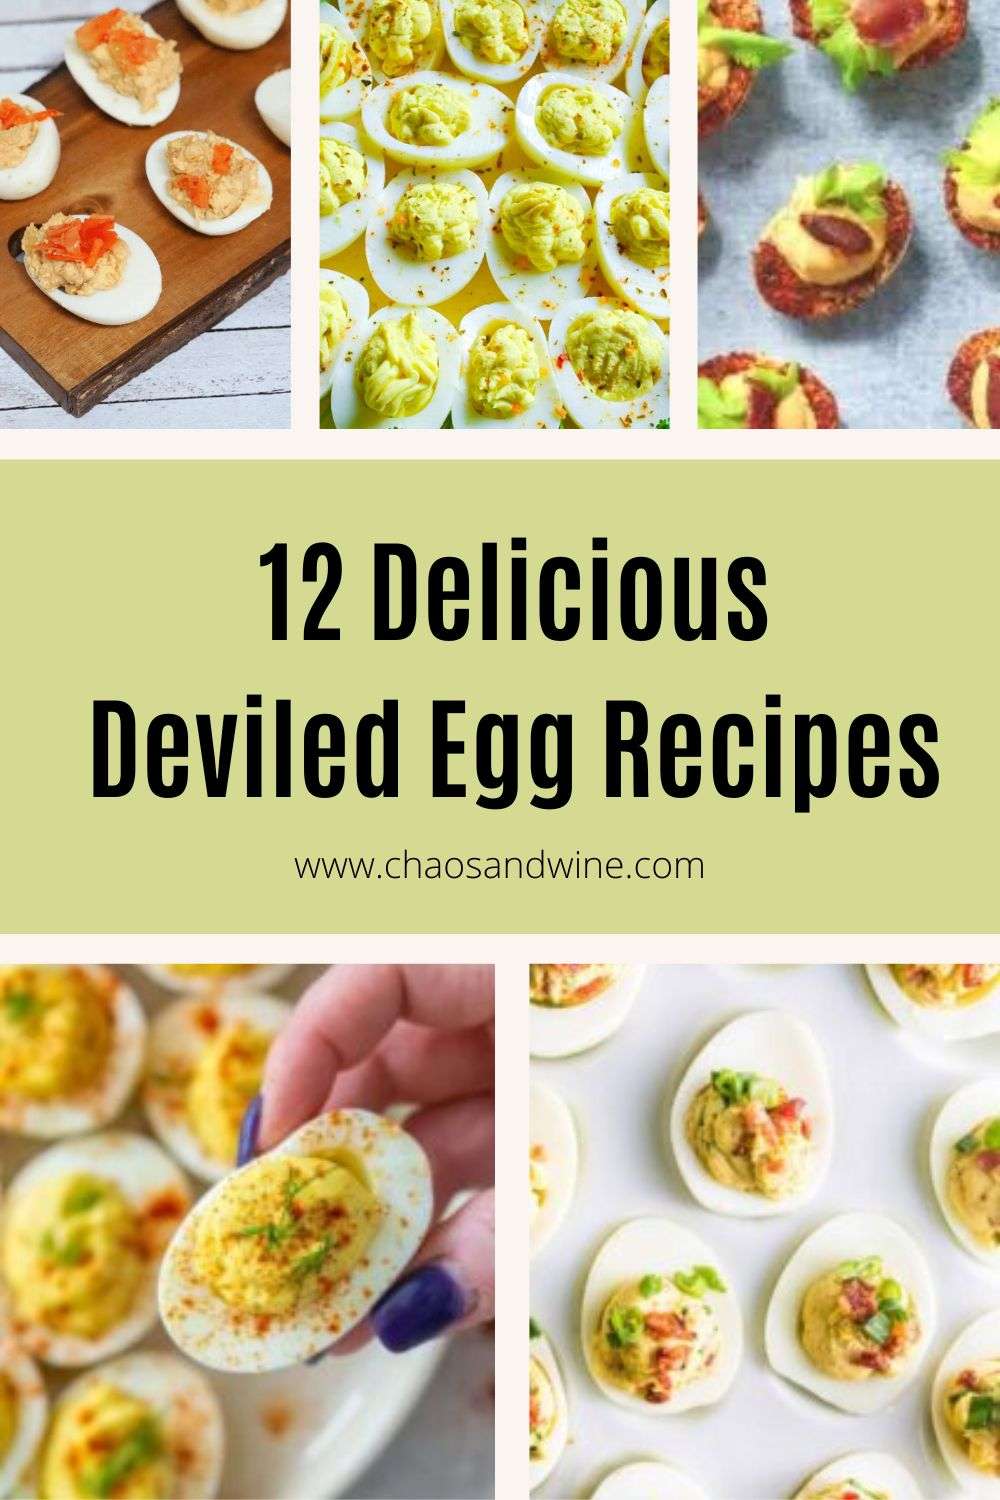 13 Of The Best Deviled Egg Recipes